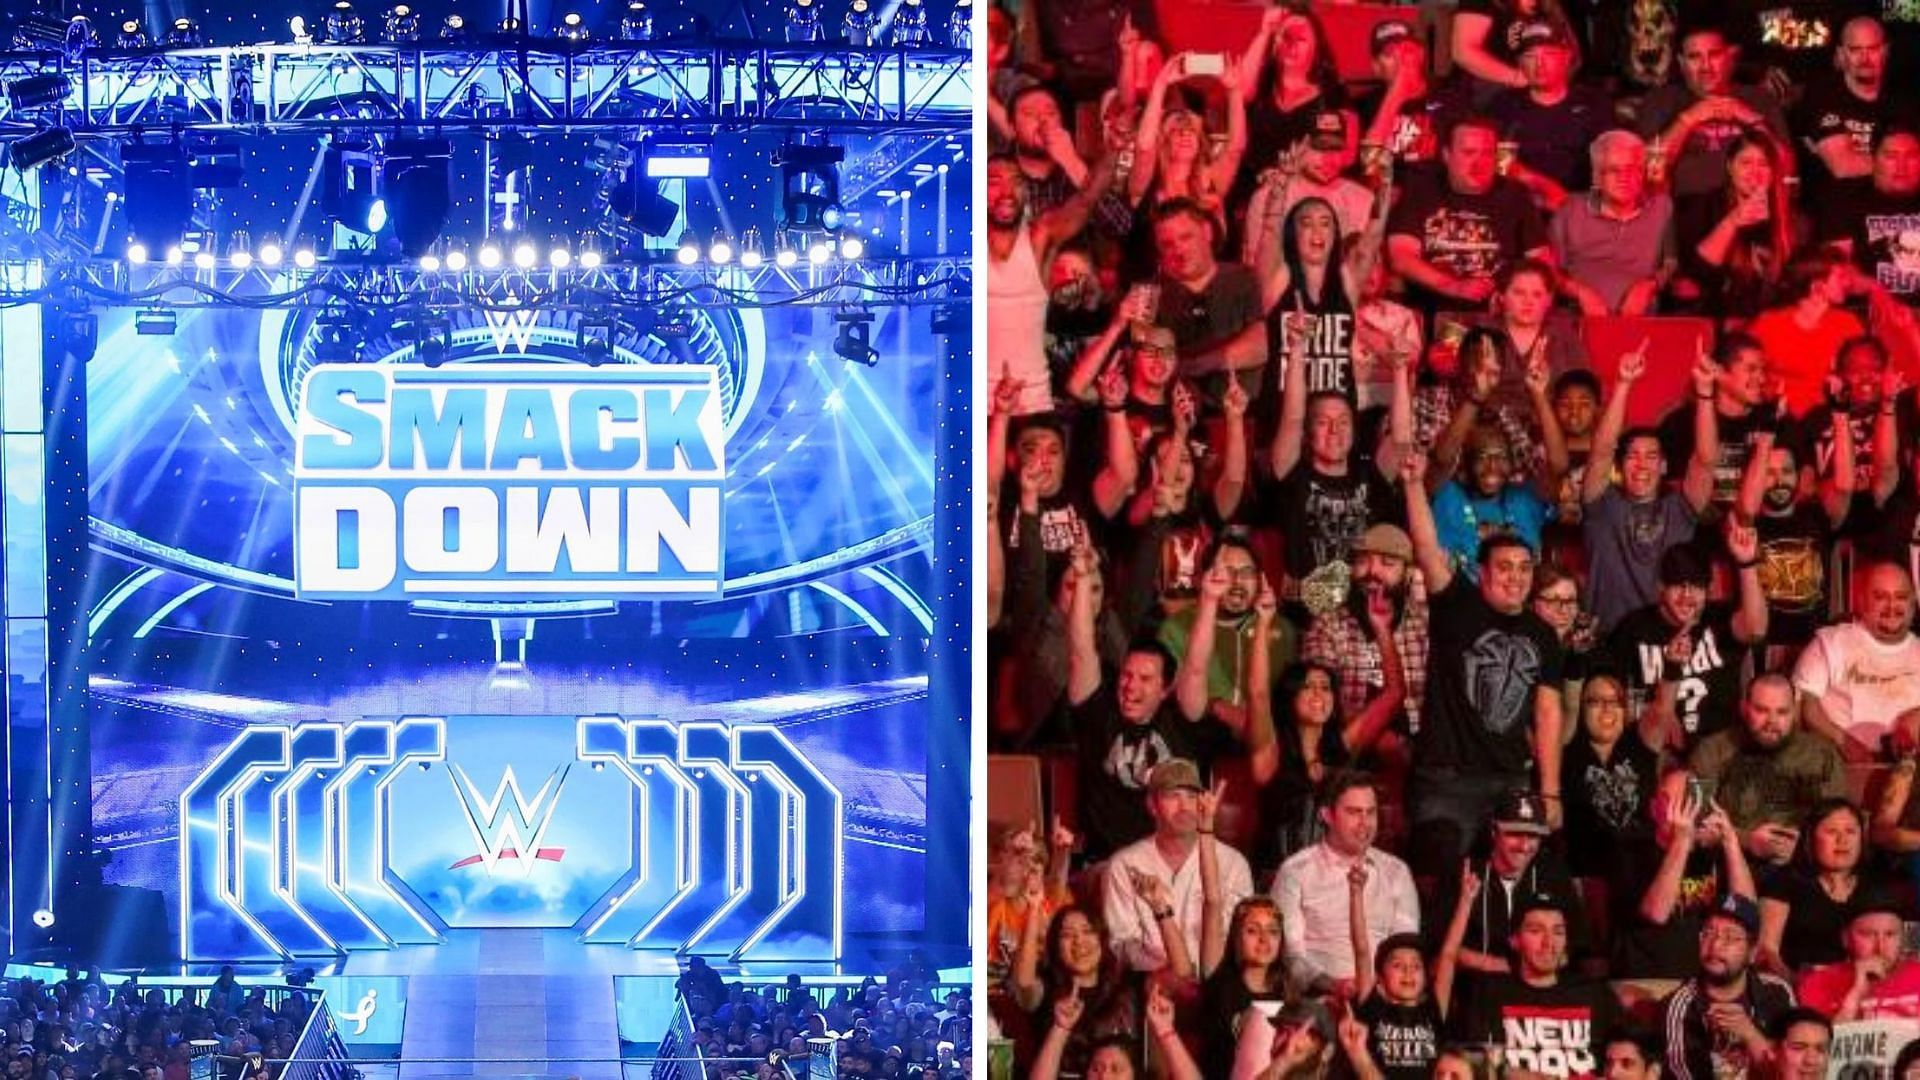 SmackDown Airs on Friday nights on the USA network